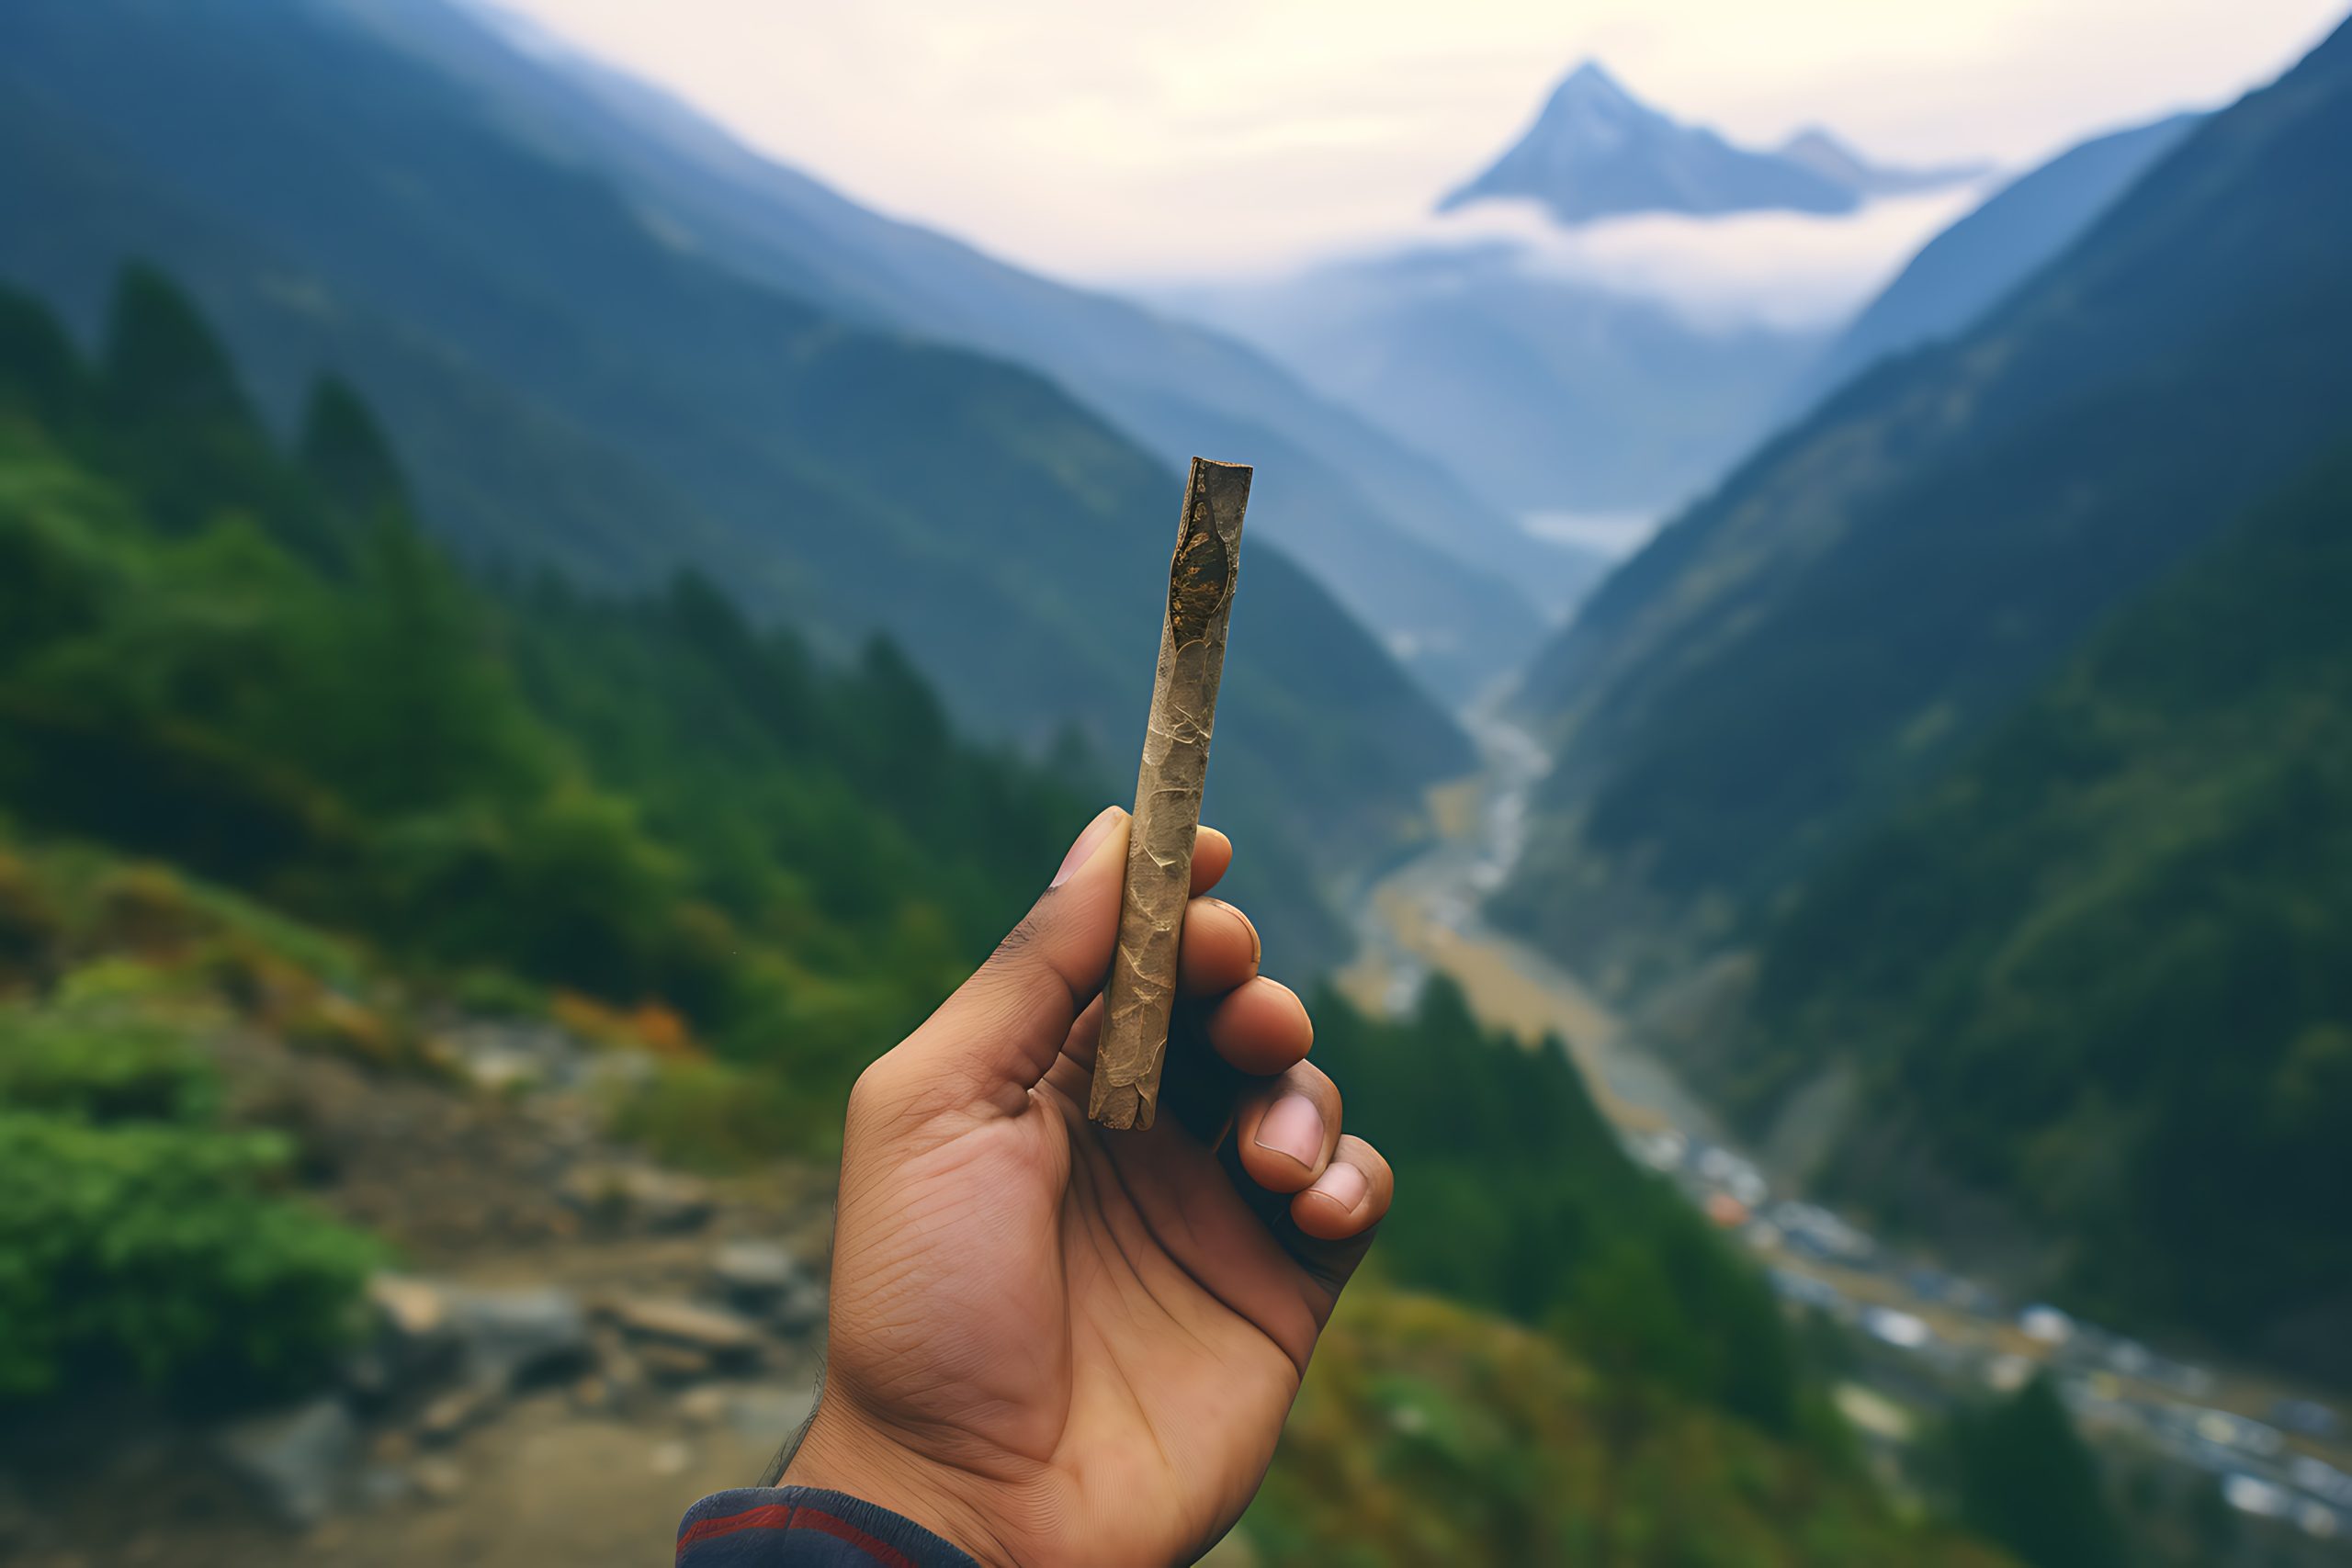 Hand holding a smoking joint in the himalaya, weed, mountains, himalaya mountains in the background